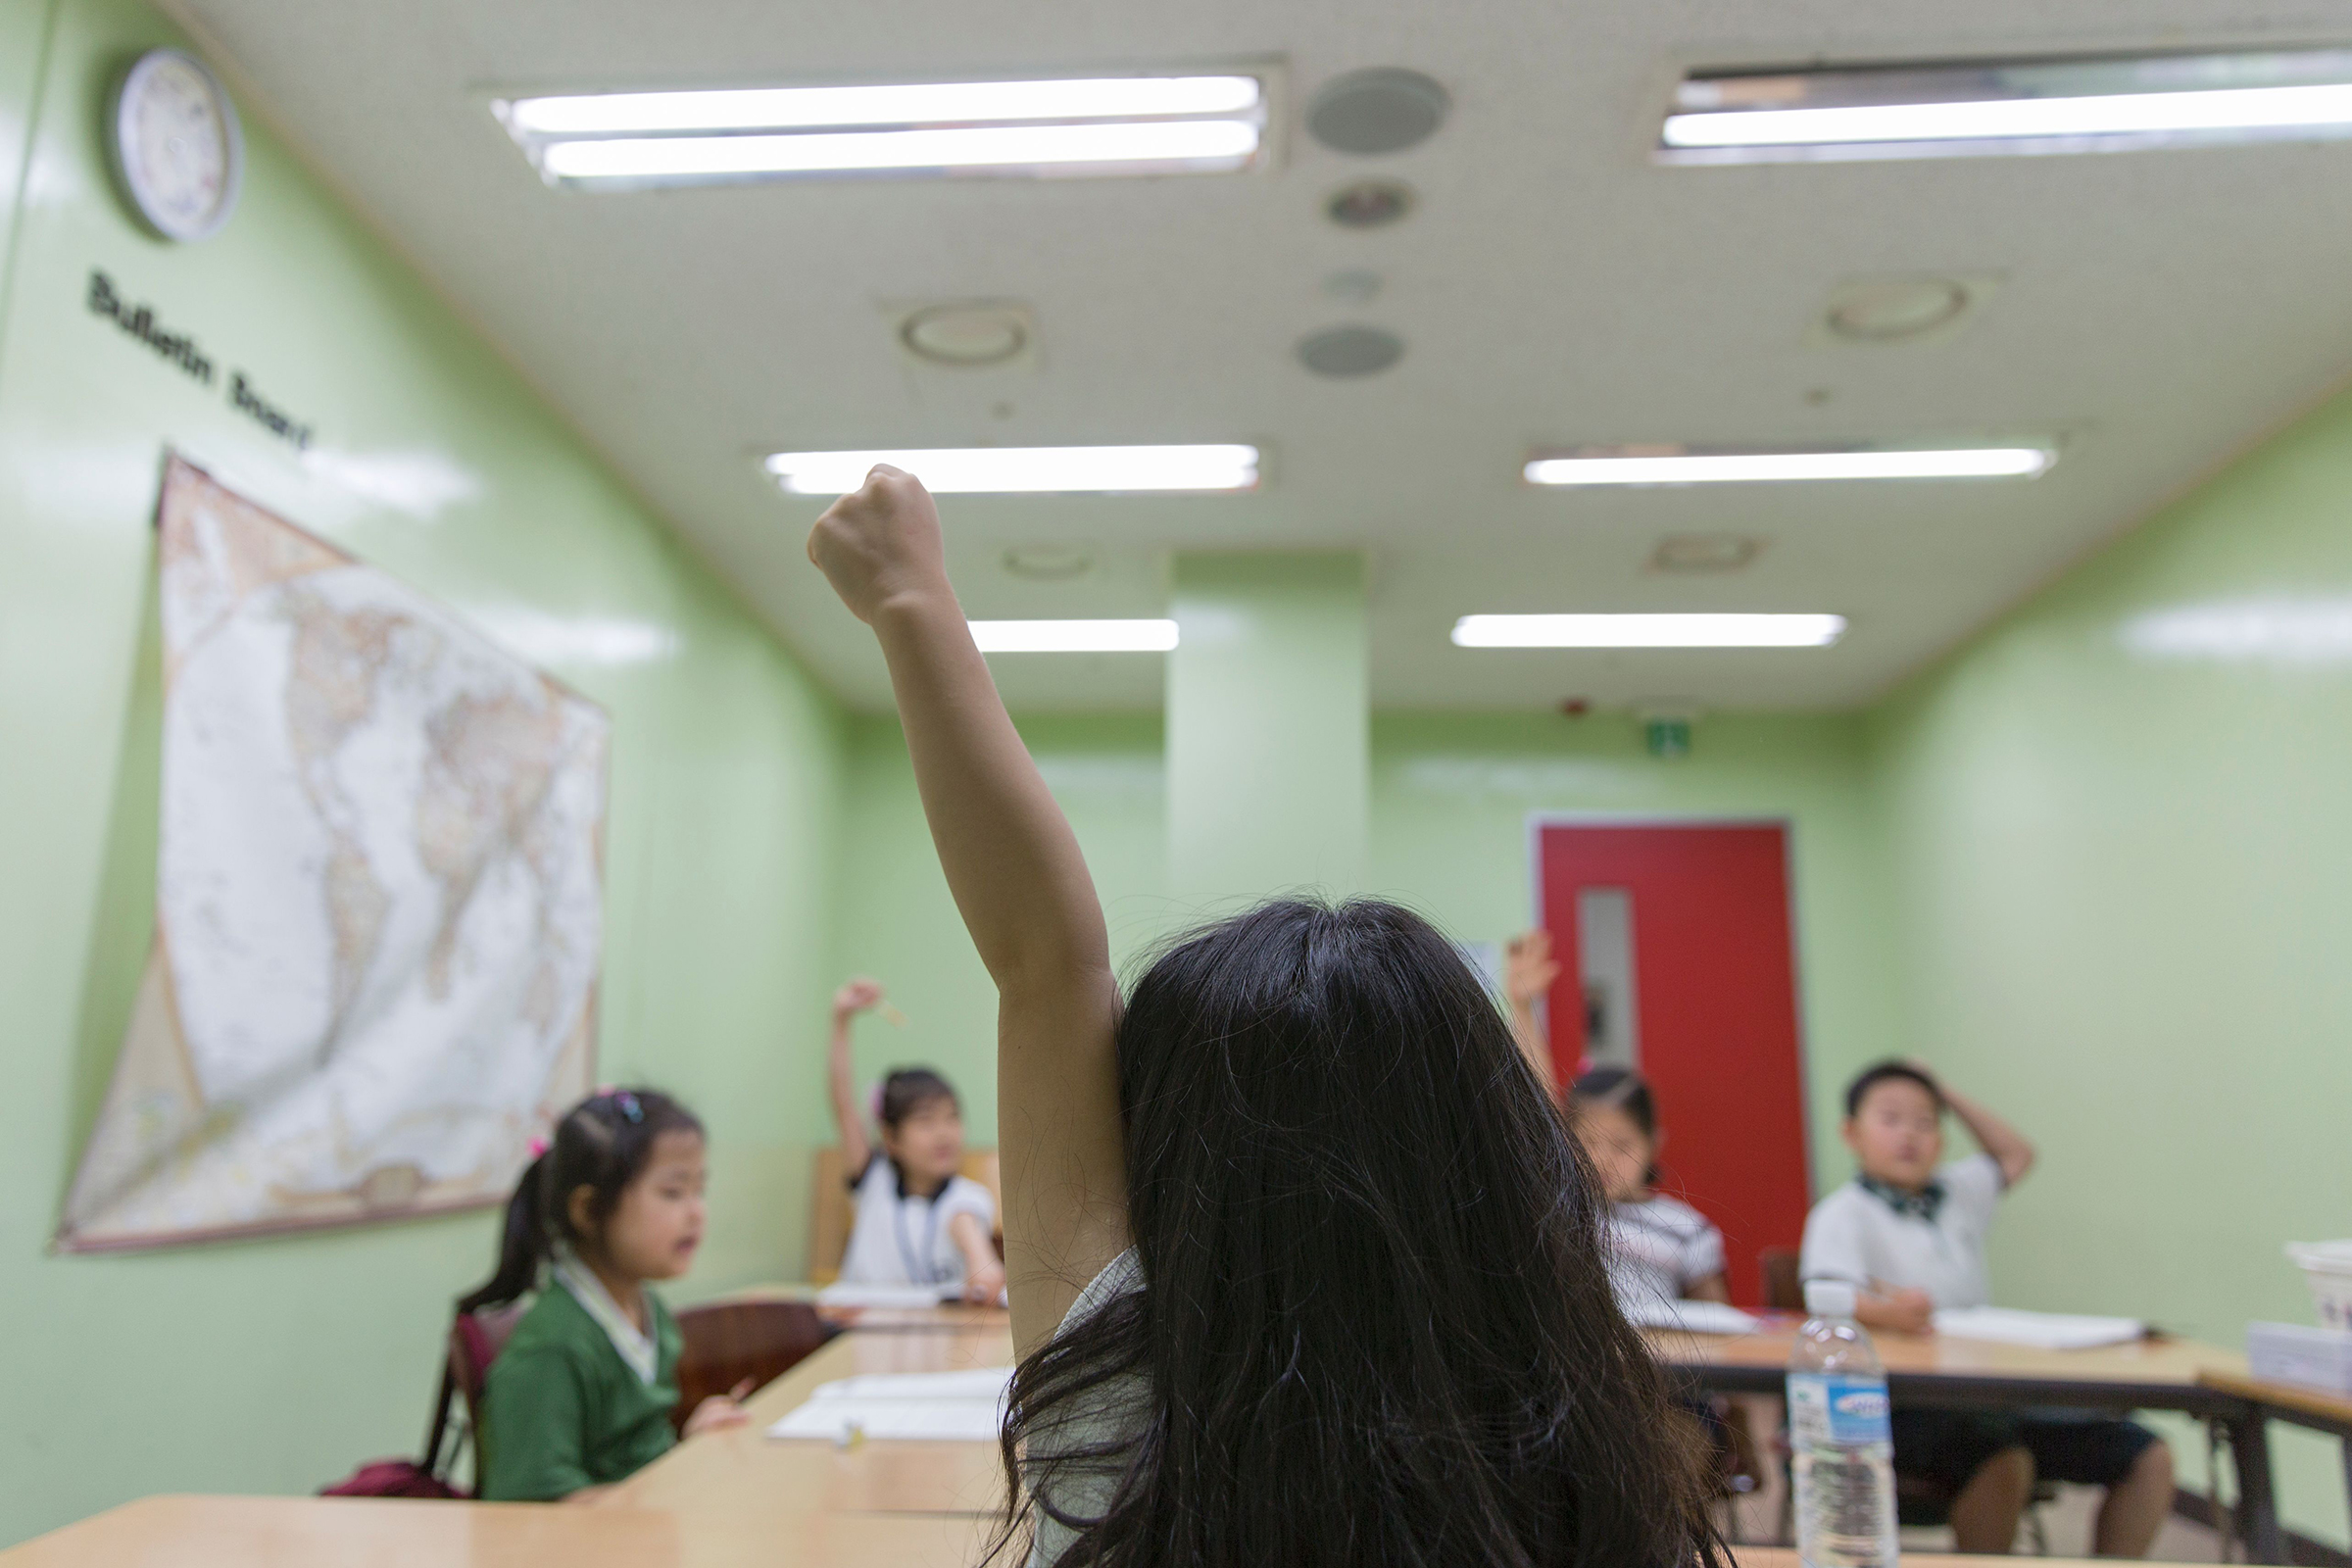 A pupil raises her hand during class at the Jongno Hagwon Academy in Seoul on Aug. 10, 2016. (Yelim Lee—AFP/Getty Images)